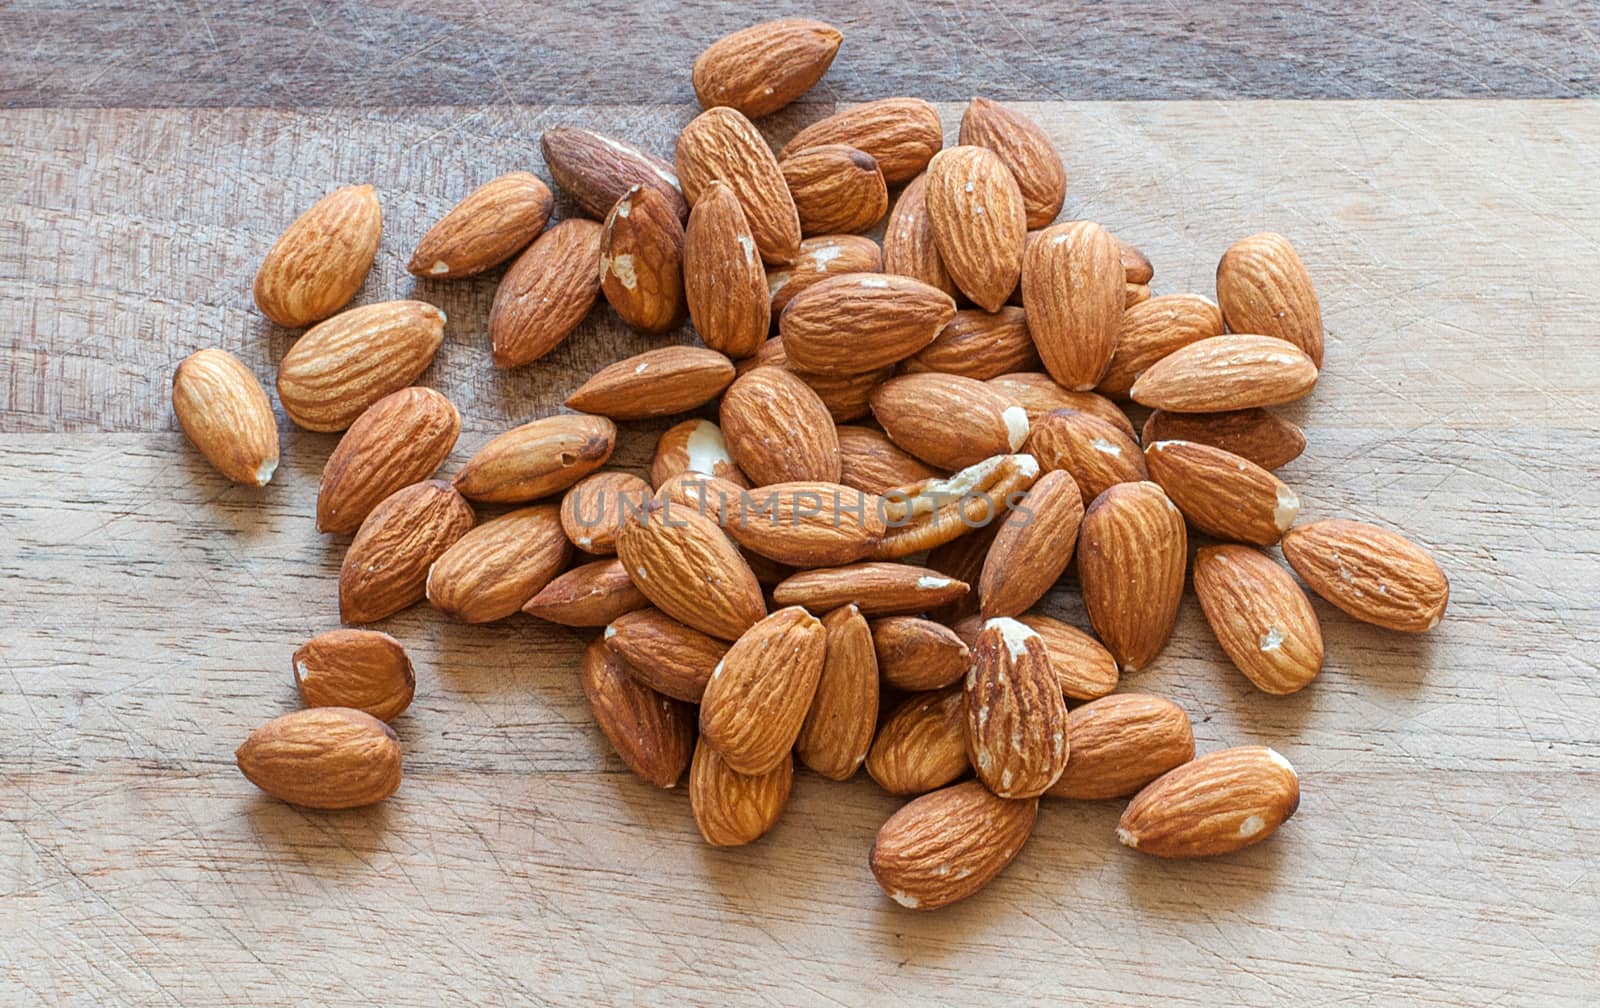 almonds on a wooden background by sirspread